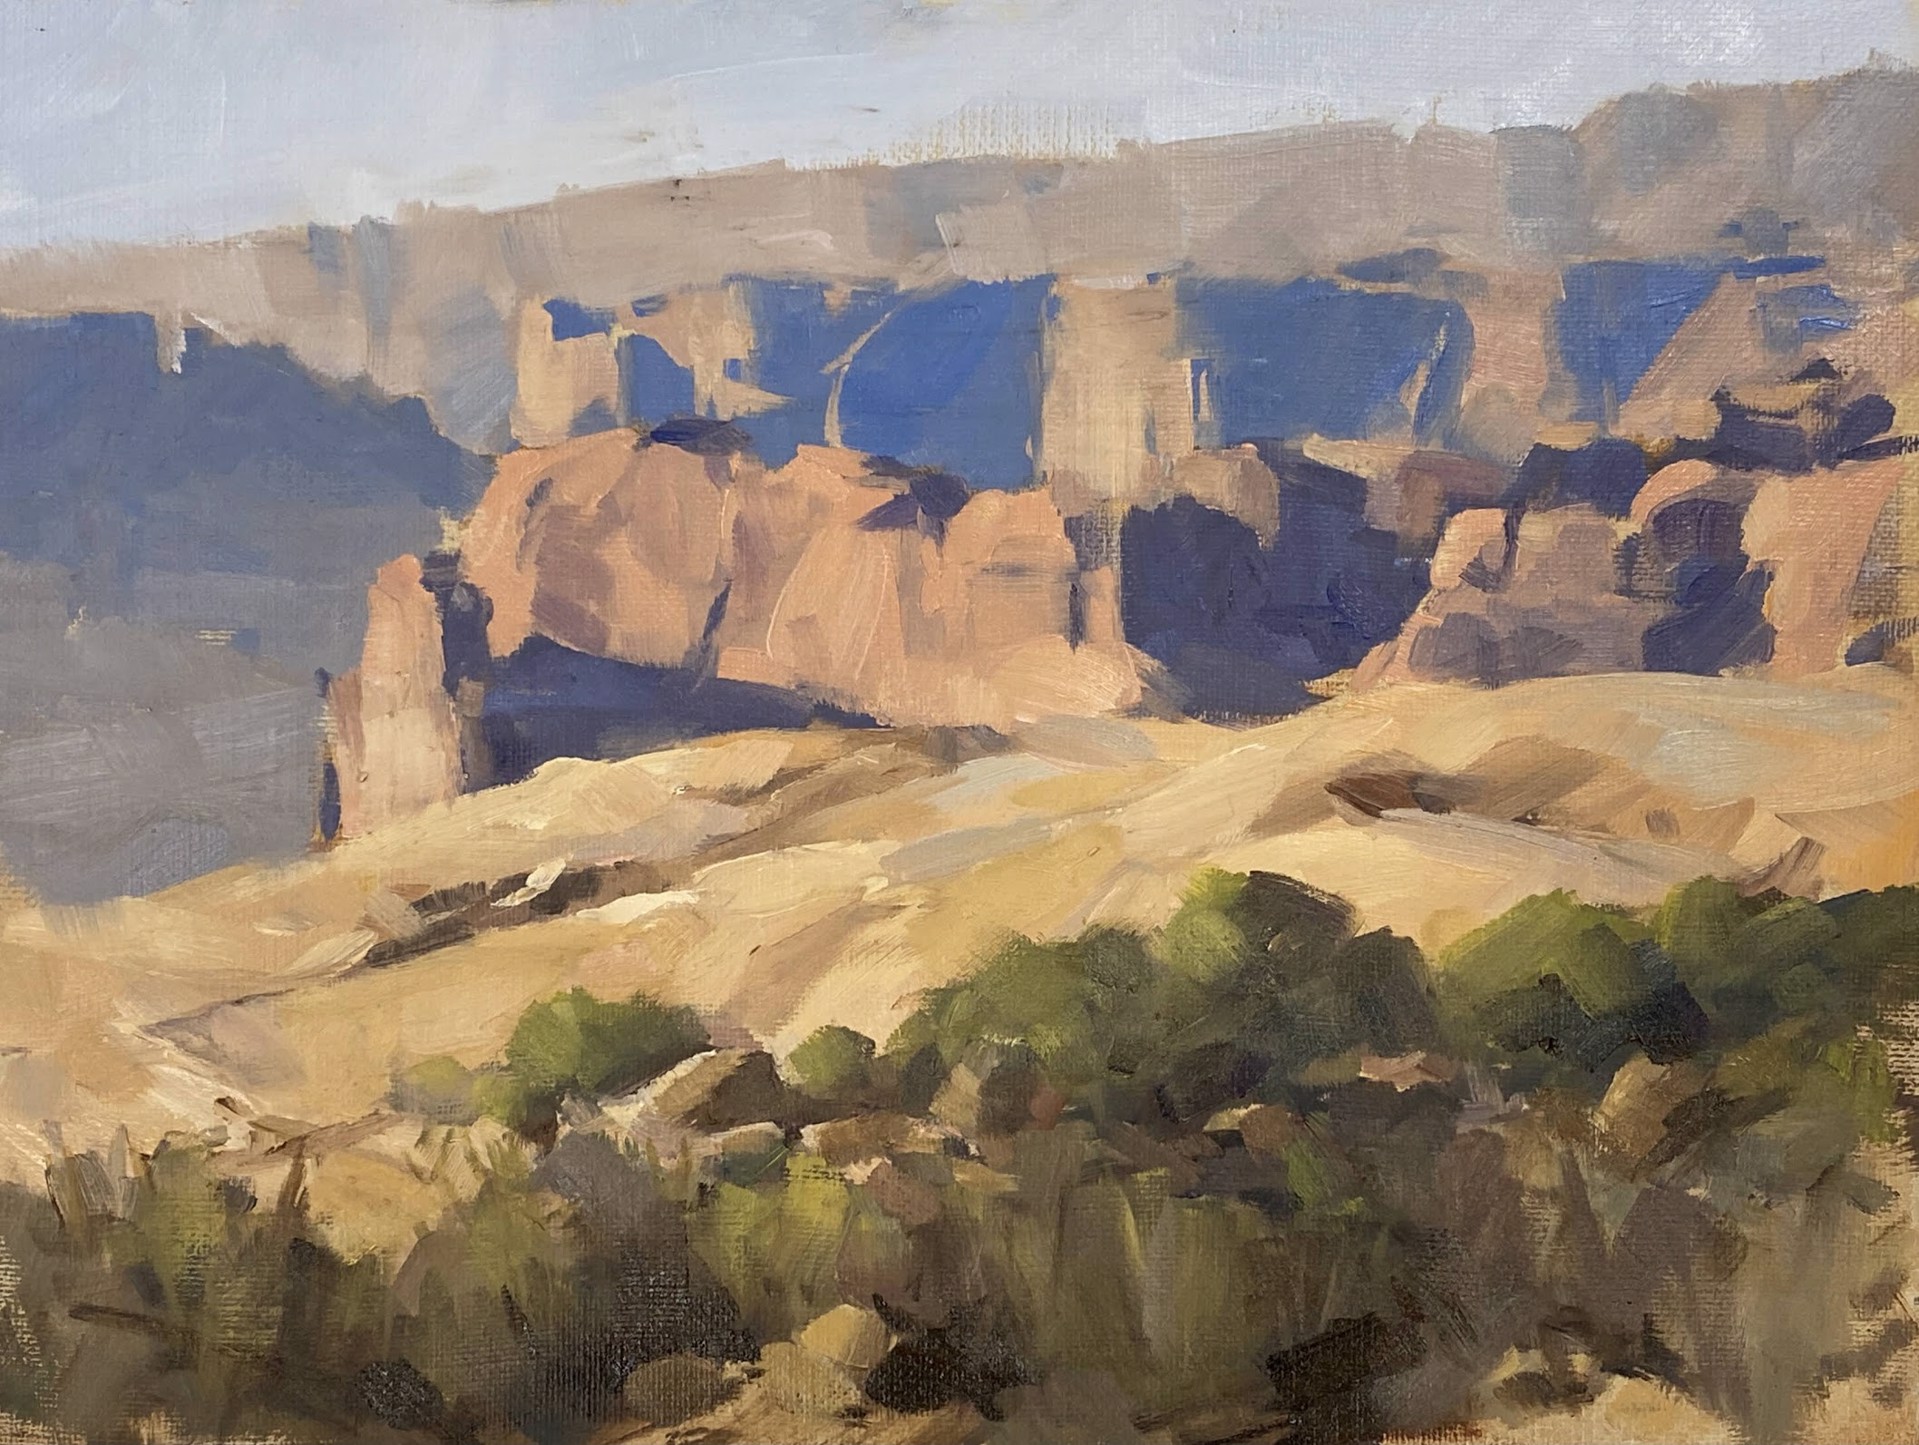 Canyon Study by Judd Mercer